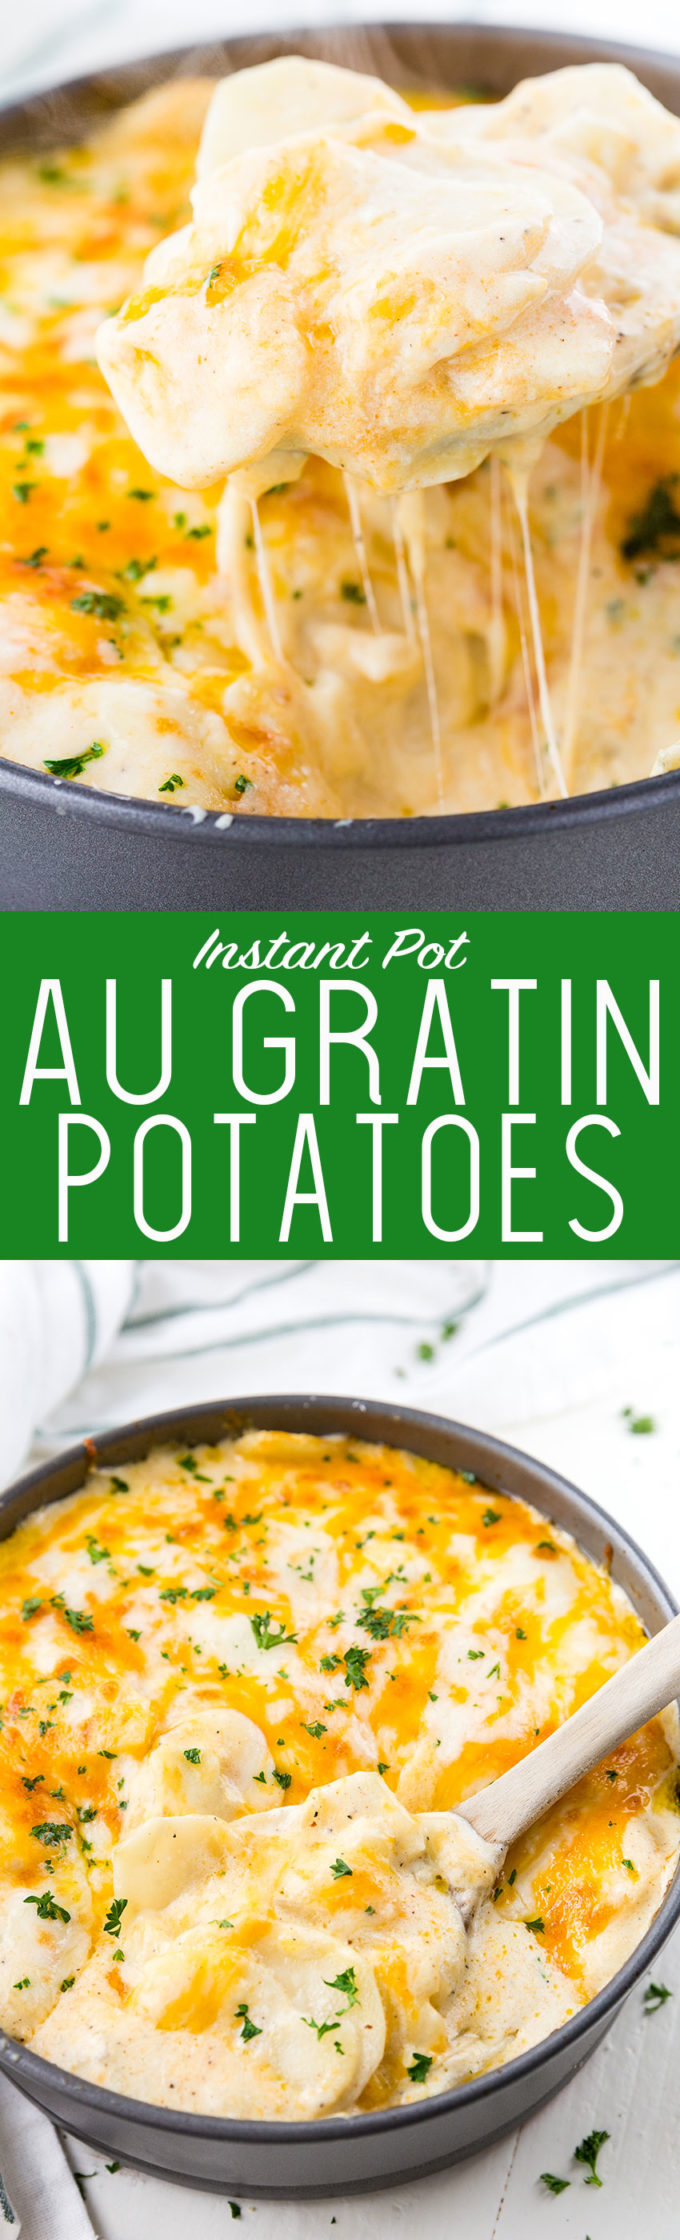 Instant Pot Au Gratin Potatoes or Scalloped Potatoes are cheesy and oh so delicious. 